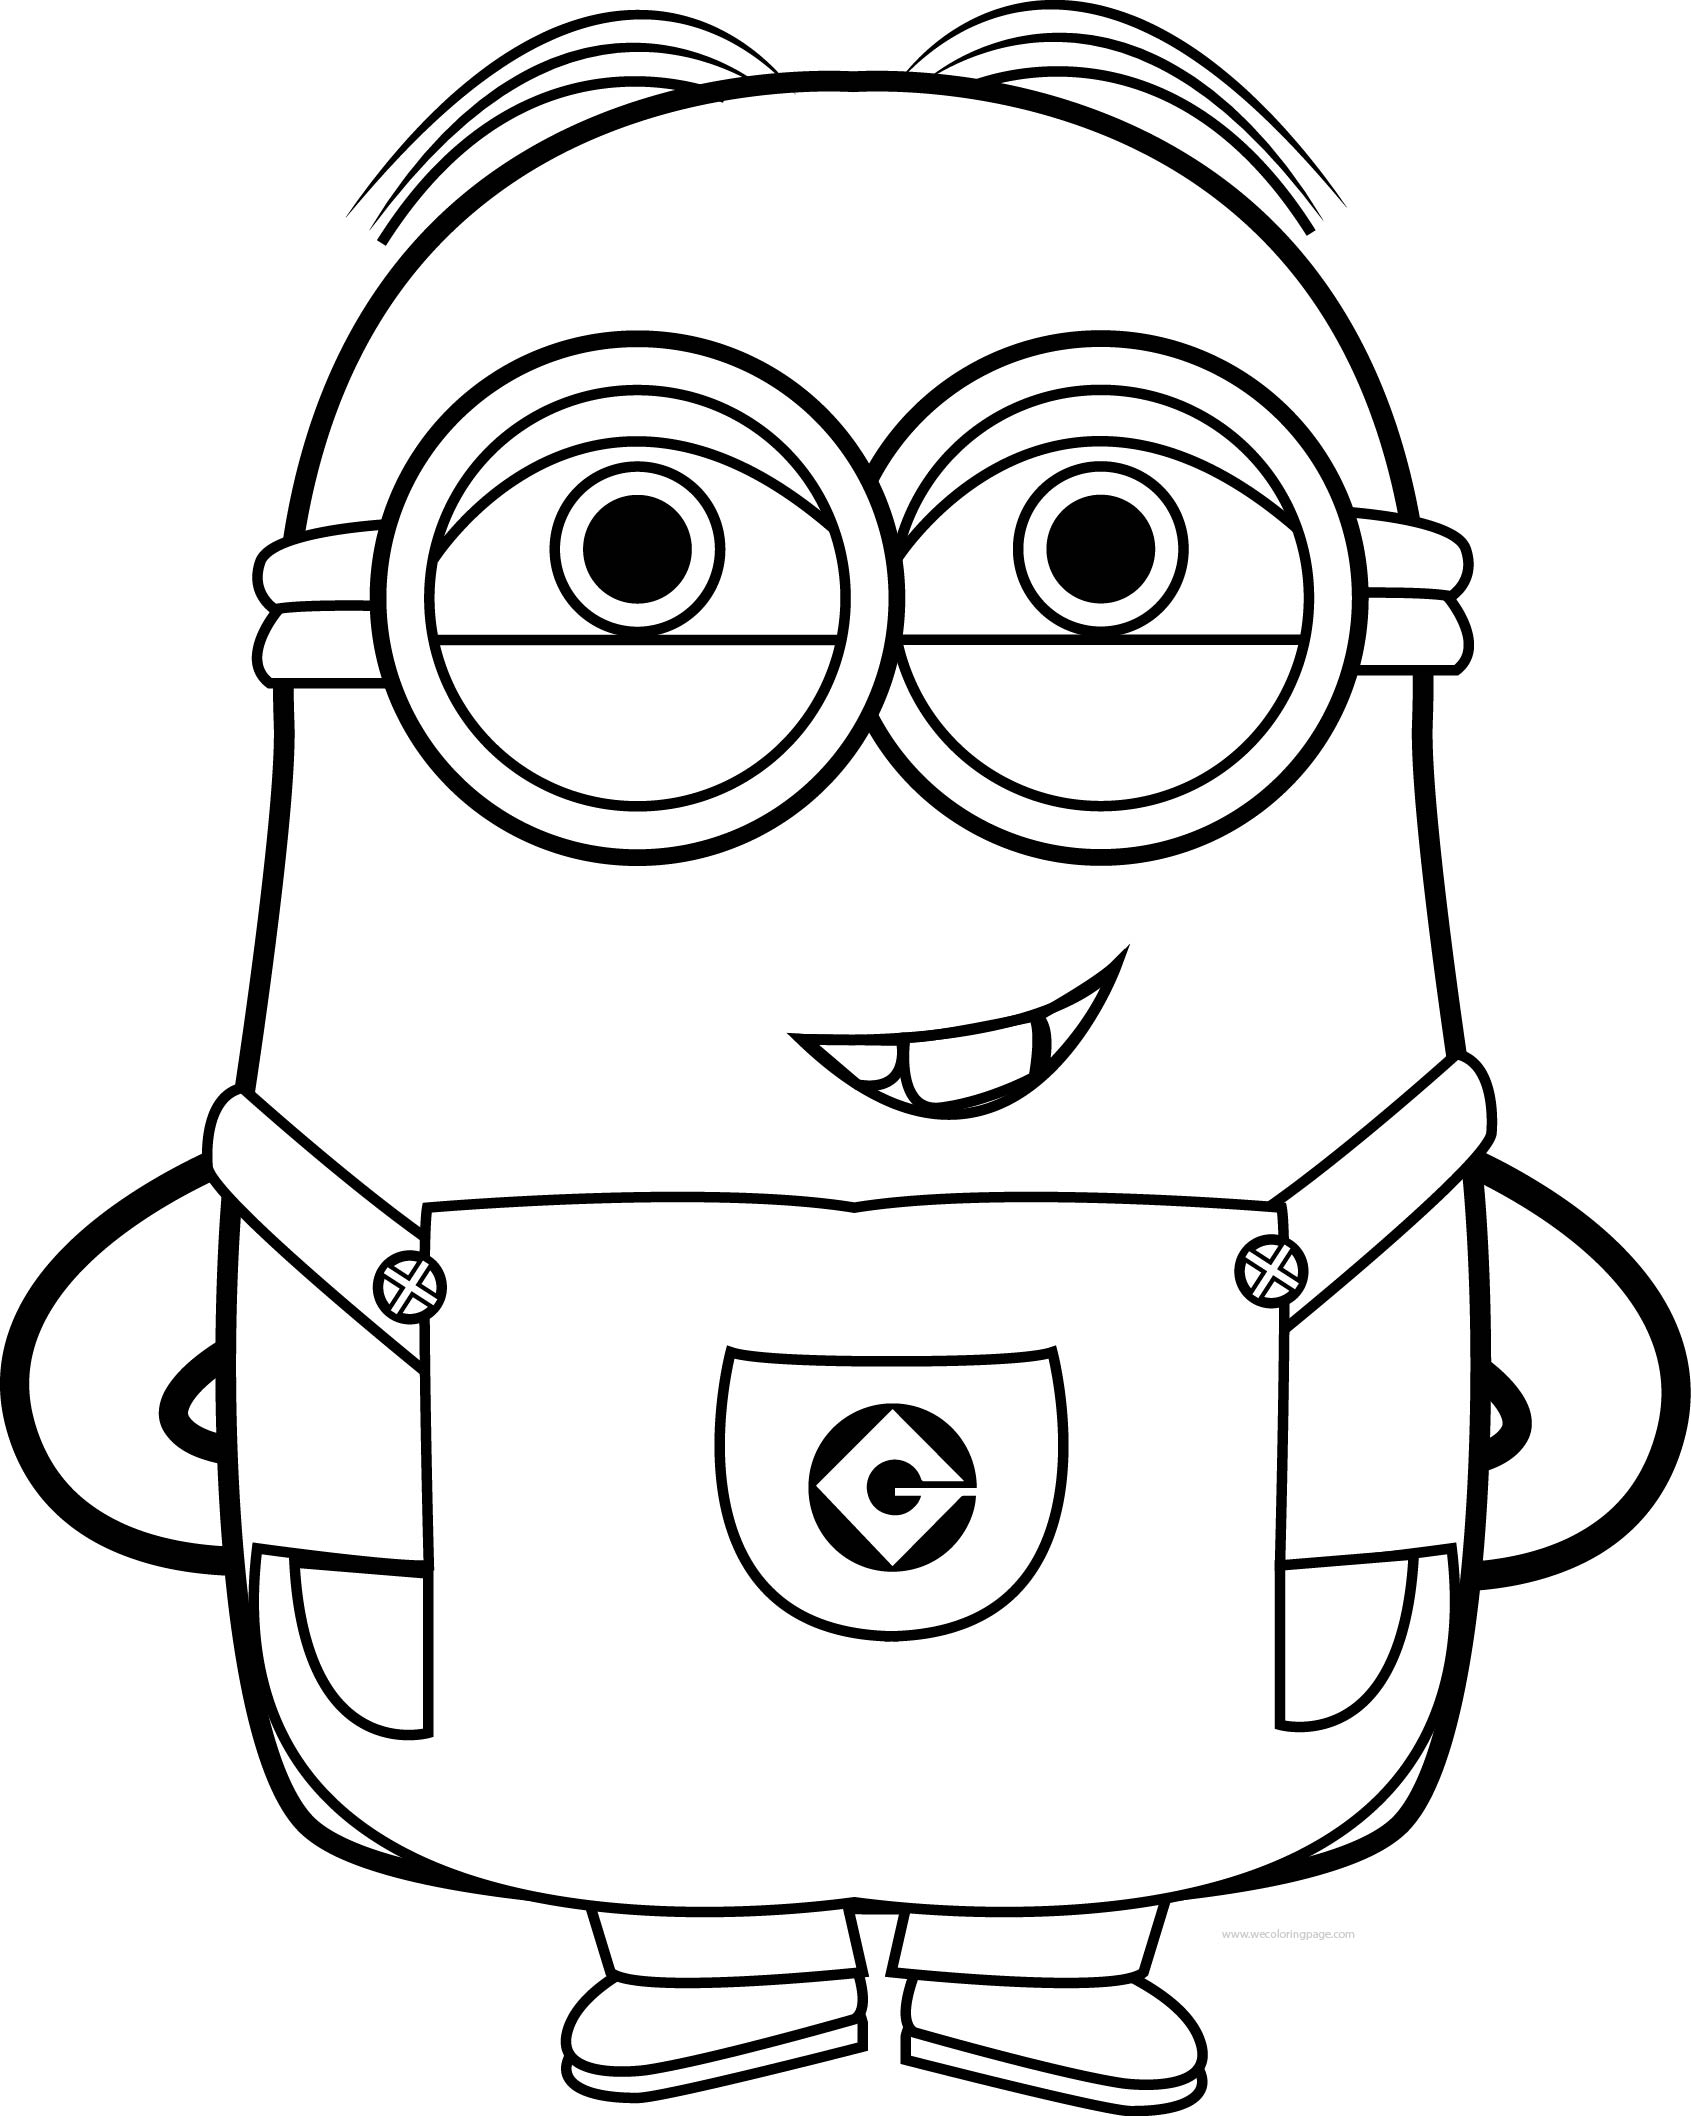 Bob The Minion Coloring Pages at GetColorings.com | Free printable ...